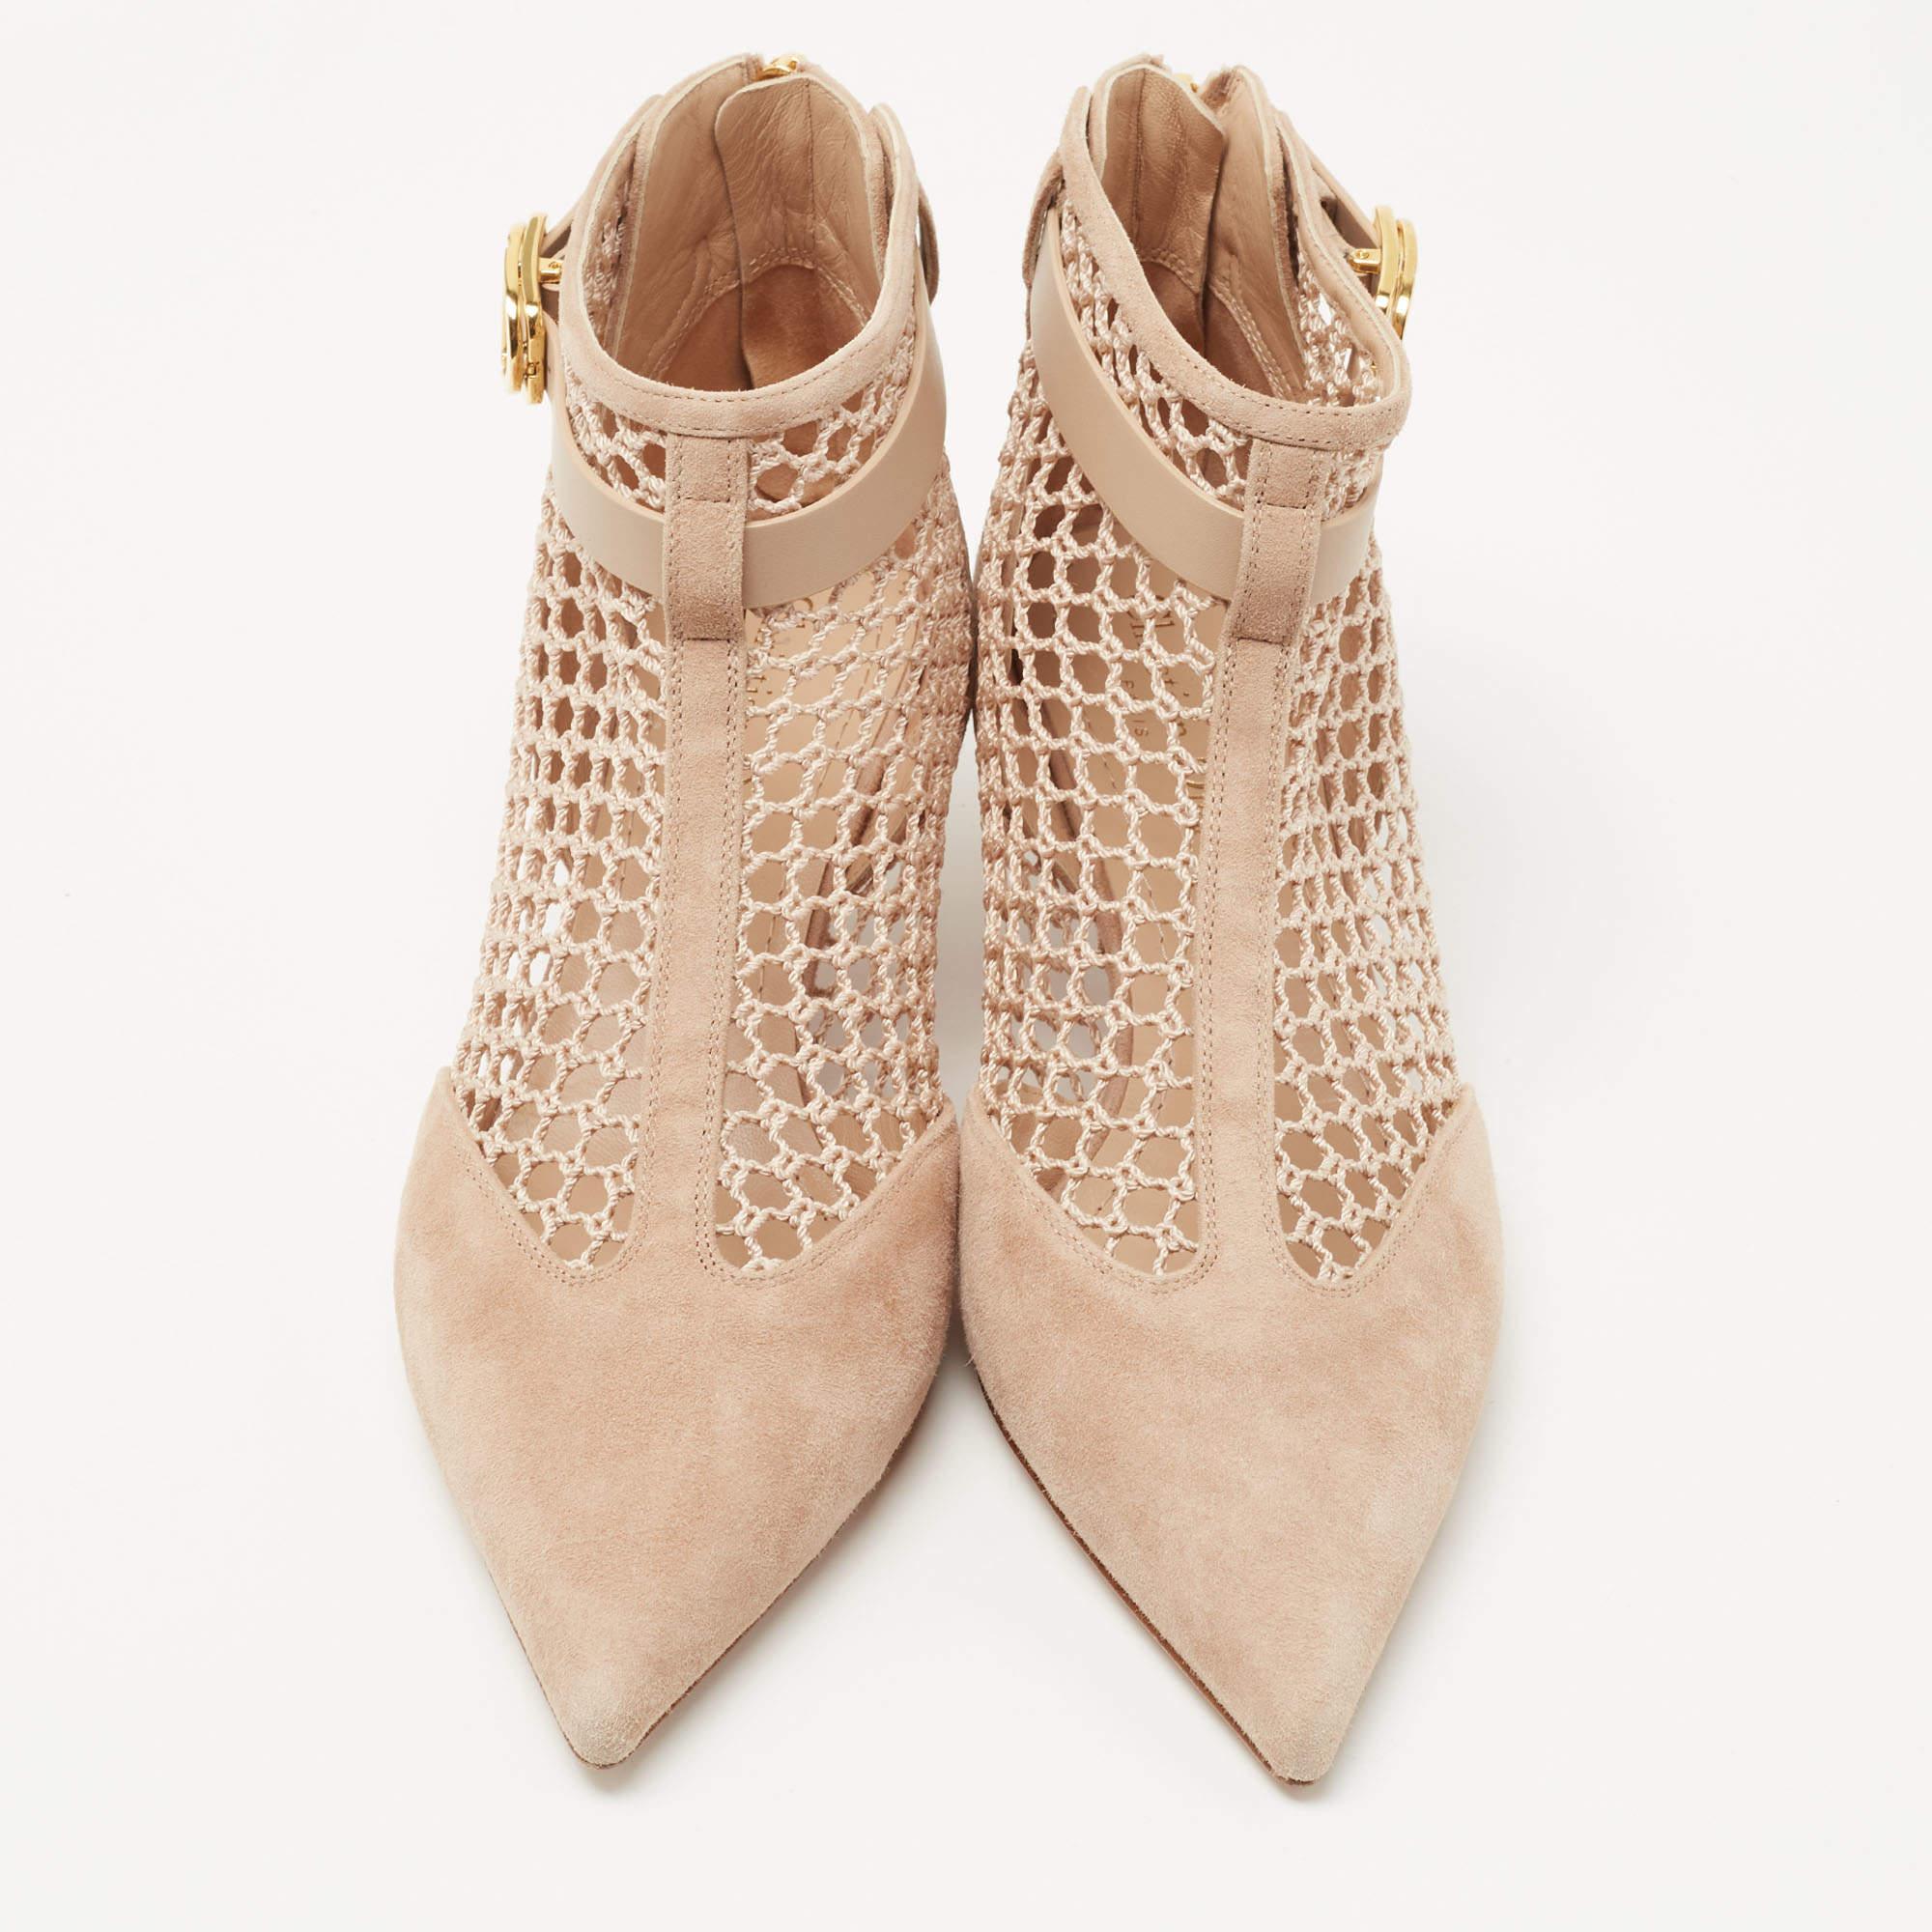 Booties are an essential part of your wardrobe, and these Dior booties, crafted from top-quality materials, are a fine choice. Offering the best of comfort and style, this sturdy-soled pair would be great with skinny jeans for a casual day